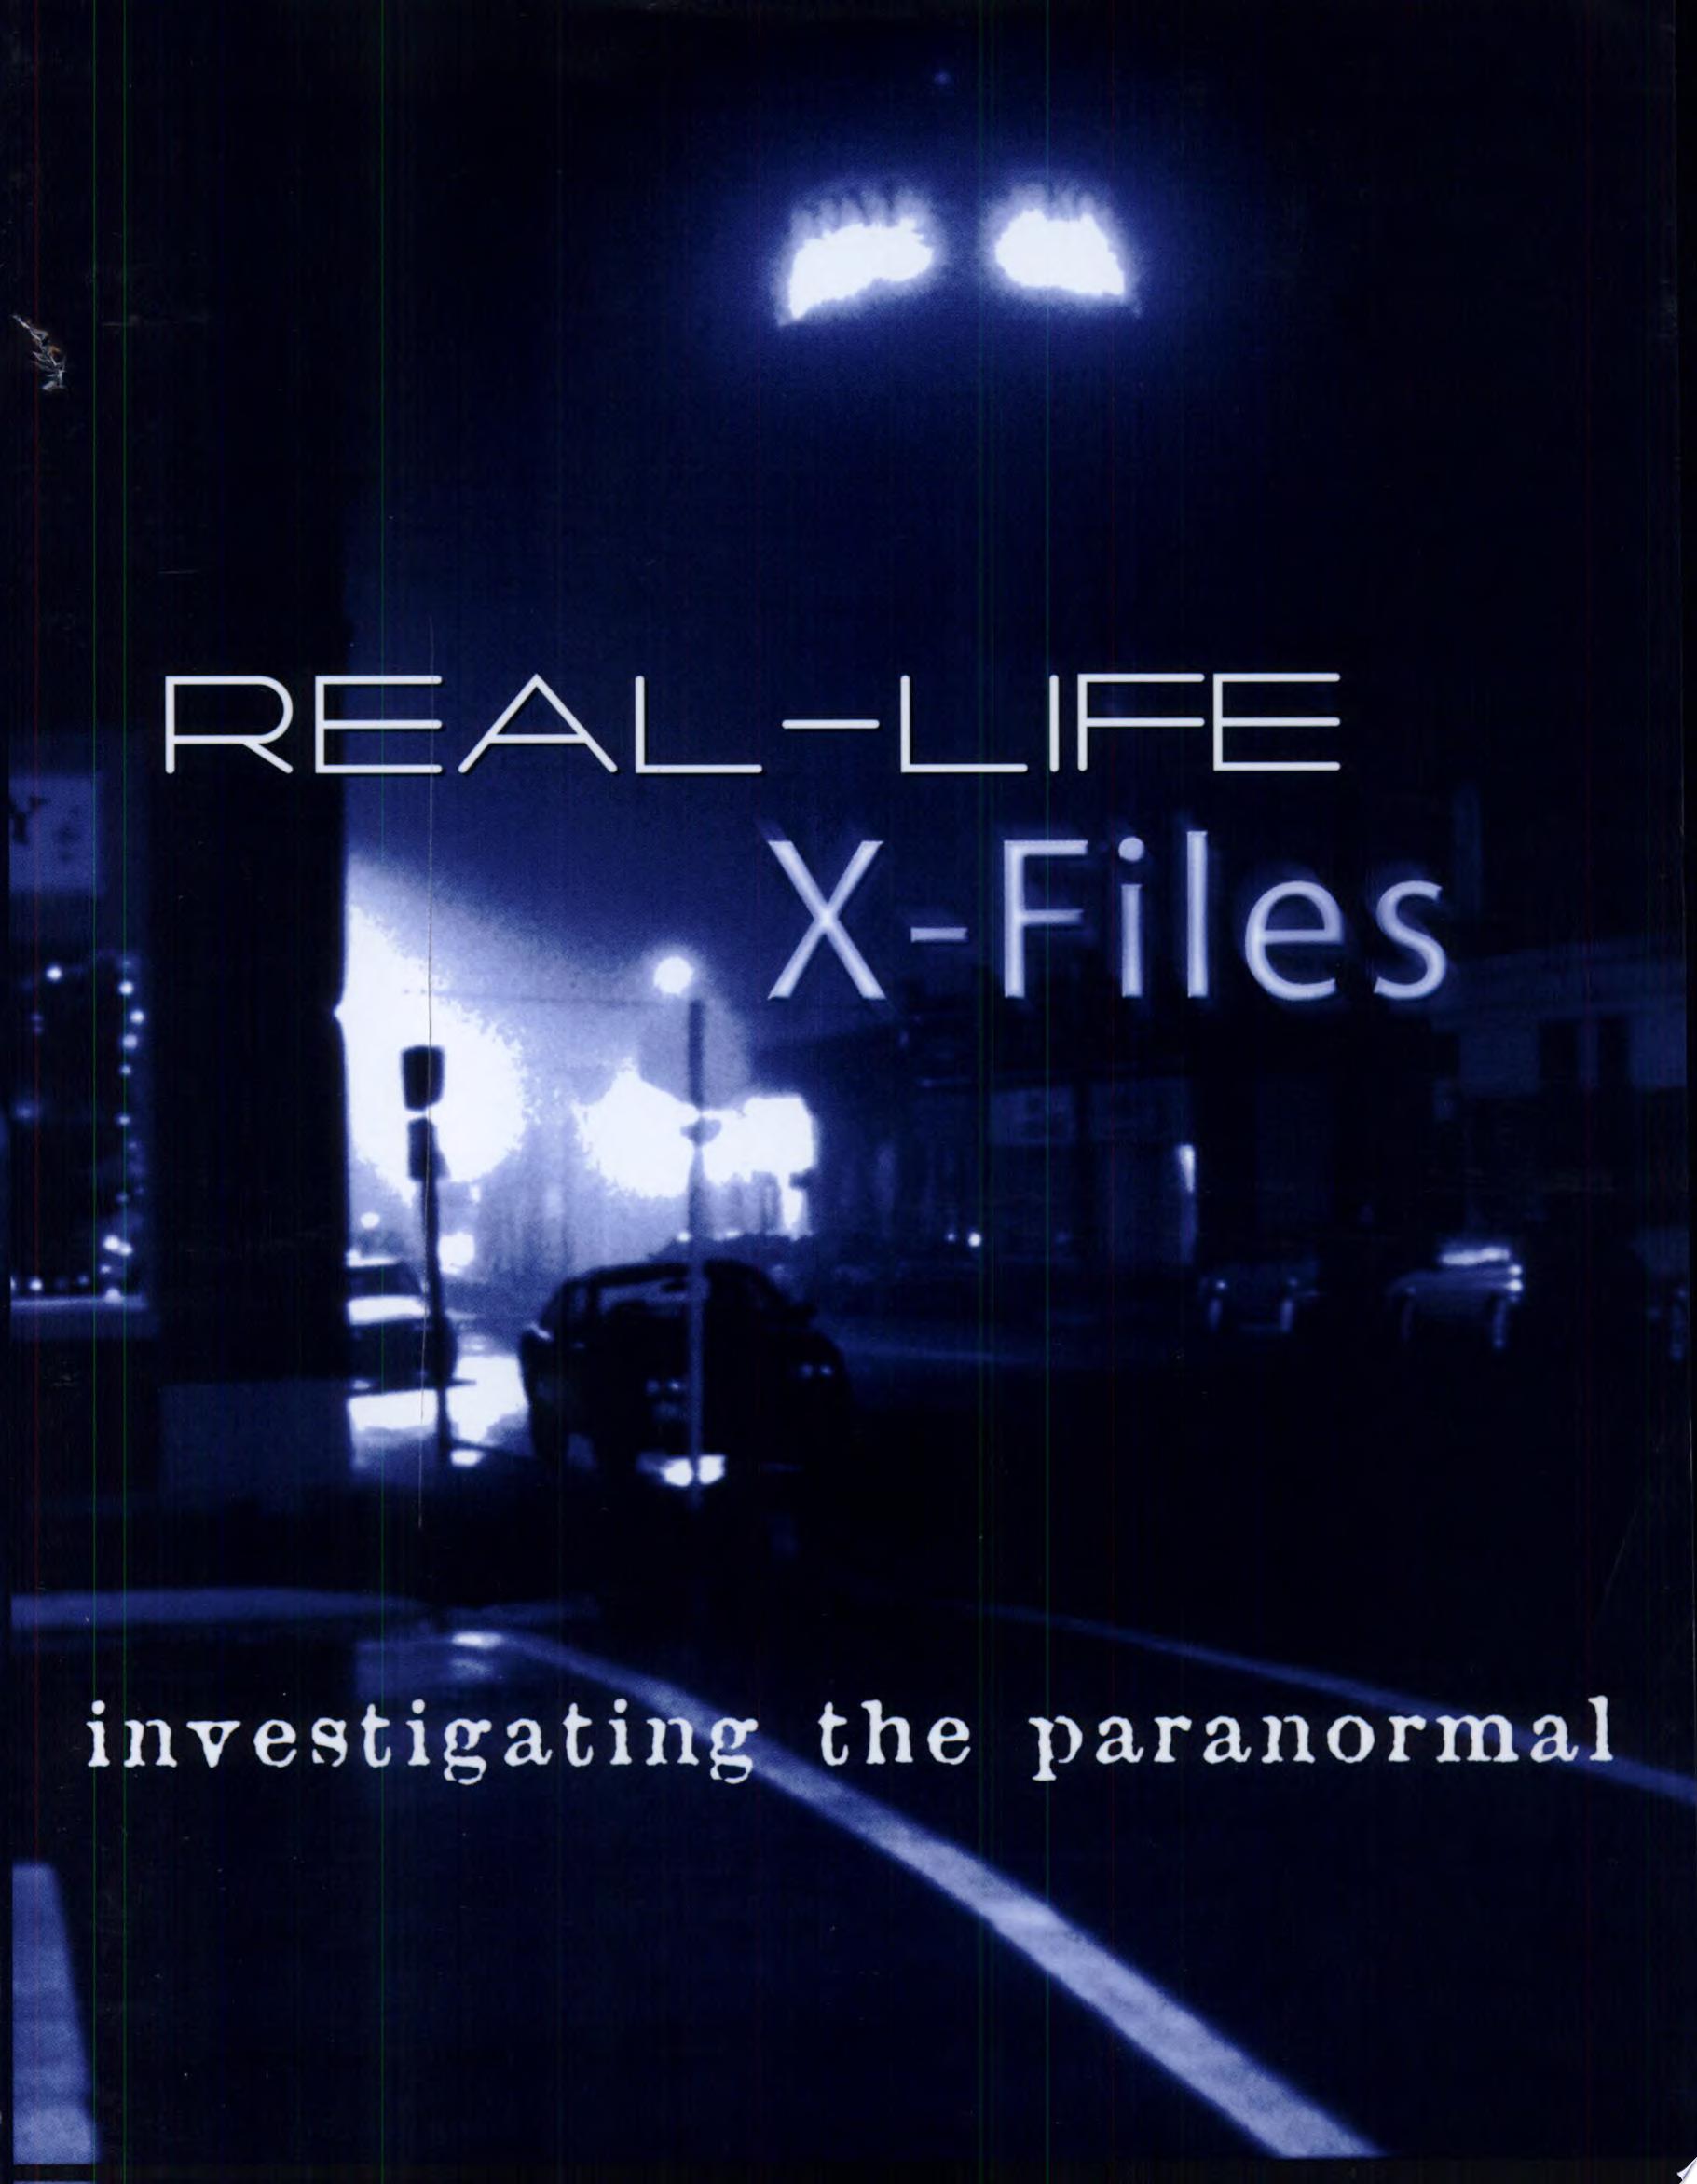 Image for "Real-Life X-Files"